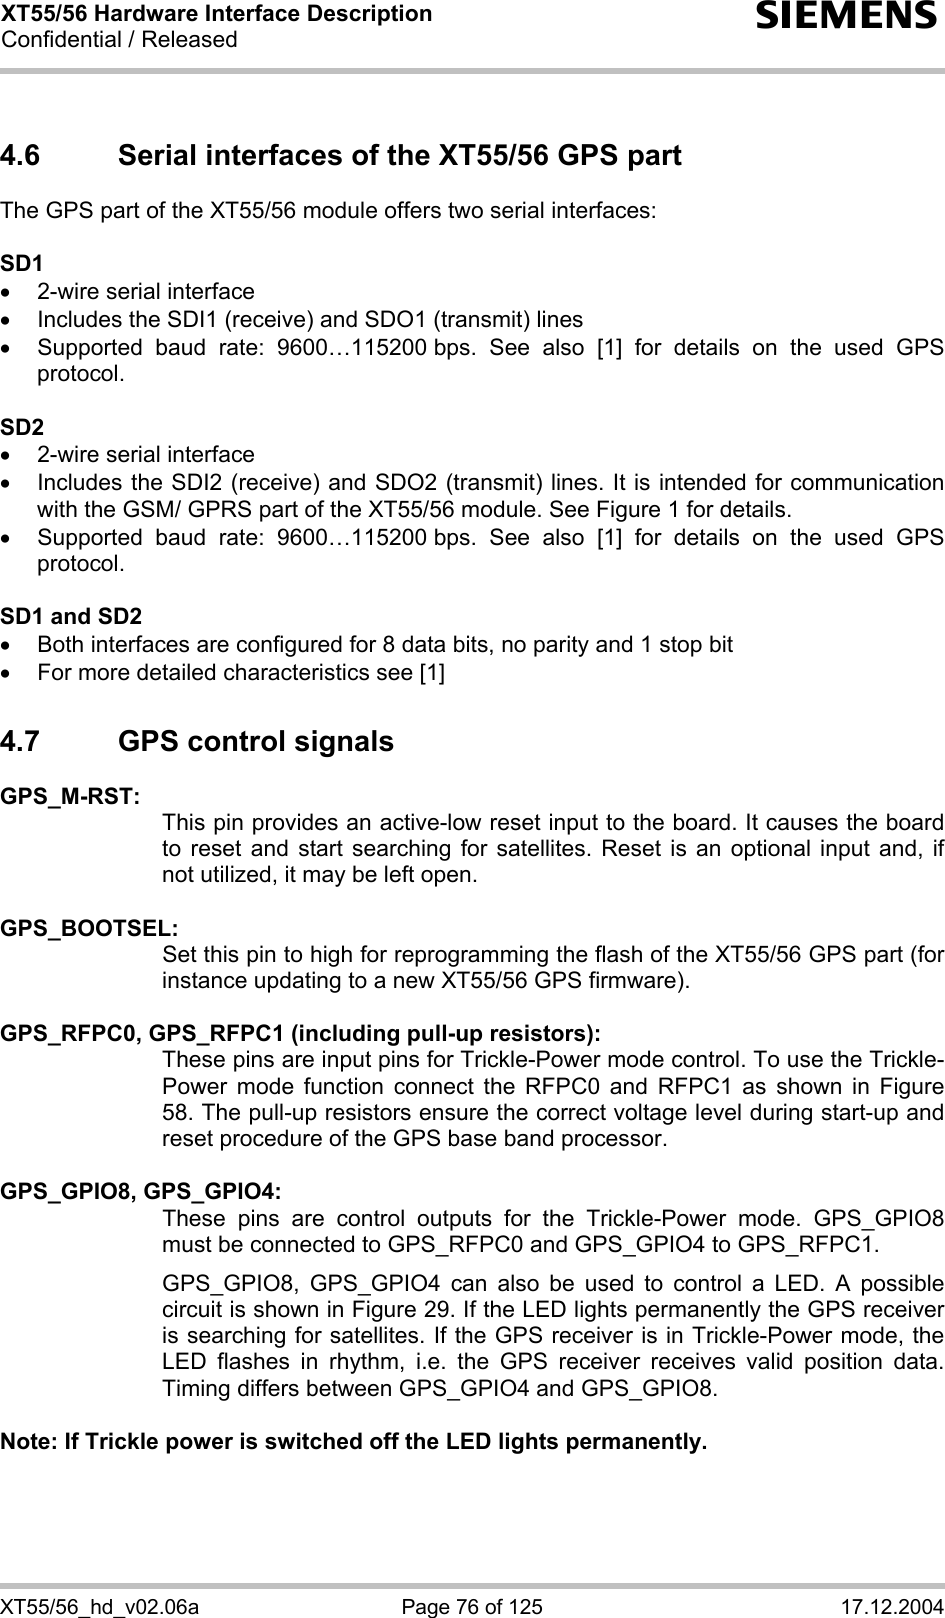 XT55/56 Hardware Interface Description Confidential / Released s XT55/56_hd_v02.06a  Page 76 of 125  17.12.2004 4.6  Serial interfaces of the XT55/56 GPS part The GPS part of the XT55/56 module offers two serial interfaces:  SD1 •  2-wire serial interface •  Includes the SDI1 (receive) and SDO1 (transmit) lines •  Supported baud rate: 9600…115200 bps. See also [1] for details on the used GPS protocol.  SD2 •  2-wire serial interface •  Includes the SDI2 (receive) and SDO2 (transmit) lines. It is intended for communication with the GSM/ GPRS part of the XT55/56 module. See Figure 1 for details. •  Supported baud rate: 9600…115200 bps. See also [1] for details on the used GPS protocol.  SD1 and SD2 •  Both interfaces are configured for 8 data bits, no parity and 1 stop bit •  For more detailed characteristics see [1] 4.7  GPS control signals GPS_M-RST:   This pin provides an active-low reset input to the board. It causes the board to reset and start searching for satellites. Reset is an optional input and, if not utilized, it may be left open.  GPS_BOOTSEL:   Set this pin to high for reprogramming the flash of the XT55/56 GPS part (for instance updating to a new XT55/56 GPS firmware).  GPS_RFPC0, GPS_RFPC1 (including pull-up resistors): These pins are input pins for Trickle-Power mode control. To use the Trickle-Power mode function connect the RFPC0 and RFPC1 as shown in Figure 58. The pull-up resistors ensure the correct voltage level during start-up and reset procedure of the GPS base band processor.  GPS_GPIO8, GPS_GPIO4:   These pins are control outputs for the Trickle-Power mode. GPS_GPIO8 must be connected to GPS_RFPC0 and GPS_GPIO4 to GPS_RFPC1.  GPS_GPIO8, GPS_GPIO4 can also be used to control a LED. A possible circuit is shown in Figure 29. If the LED lights permanently the GPS receiver is searching for satellites. If the GPS receiver is in Trickle-Power mode, the LED flashes in rhythm, i.e. the GPS receiver receives valid position data. Timing differs between GPS_GPIO4 and GPS_GPIO8.  Note: If Trickle power is switched off the LED lights permanently.  